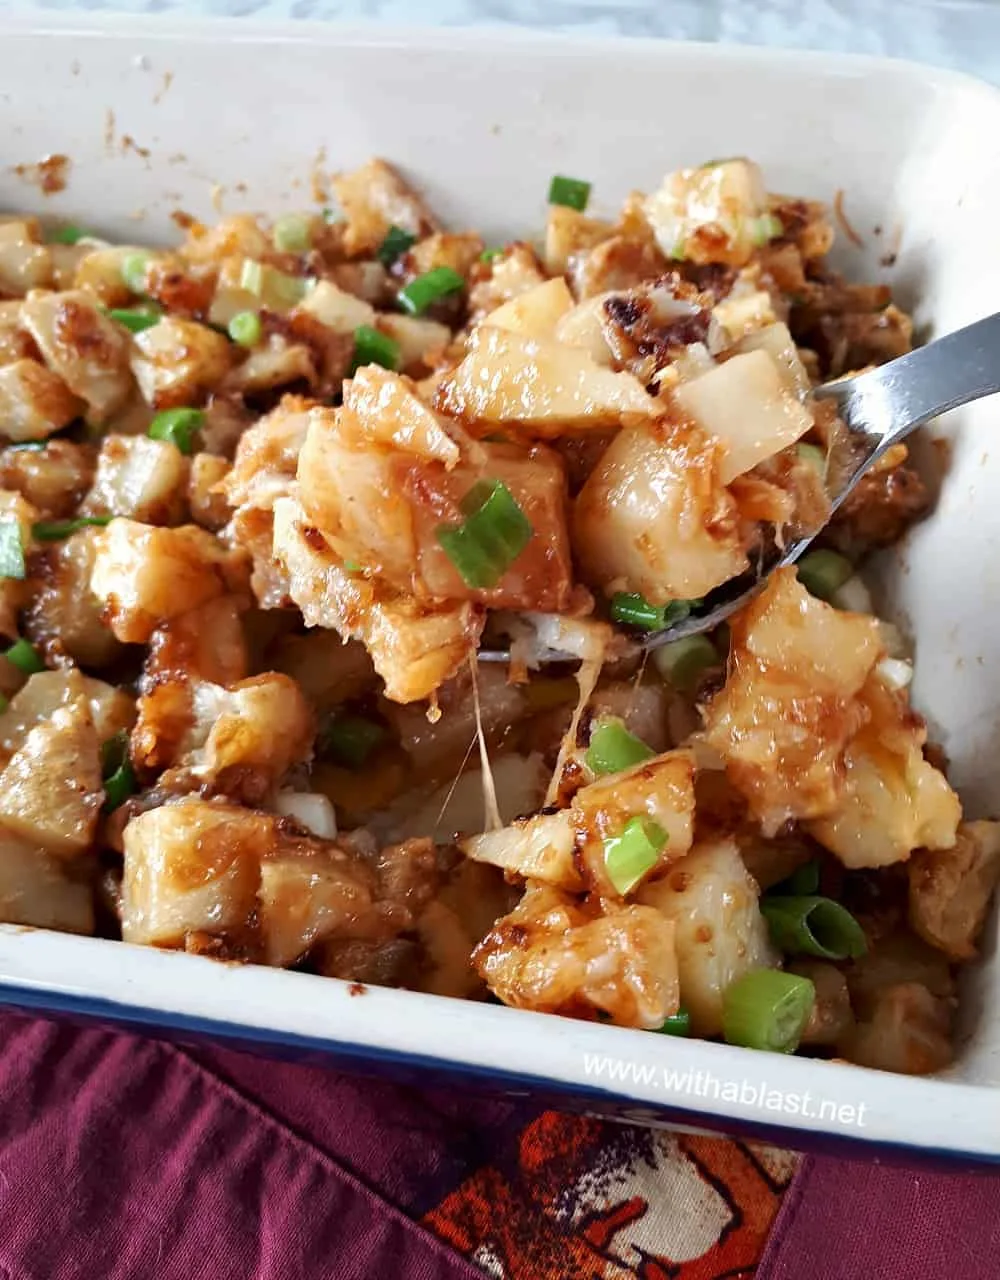 Cheesy Onion Potatoes WILL become a new family favorite if you love your Potatoes ! Only 5 ingredients and it tastes incredibly good as a side dish or a light meatless dinner #PotatoRecipes #Sidedish #ThanksgivingSideDish #ThanksgivingRecipes #Thanksgiving #ChristmasSideDish #ChristmasRecipes